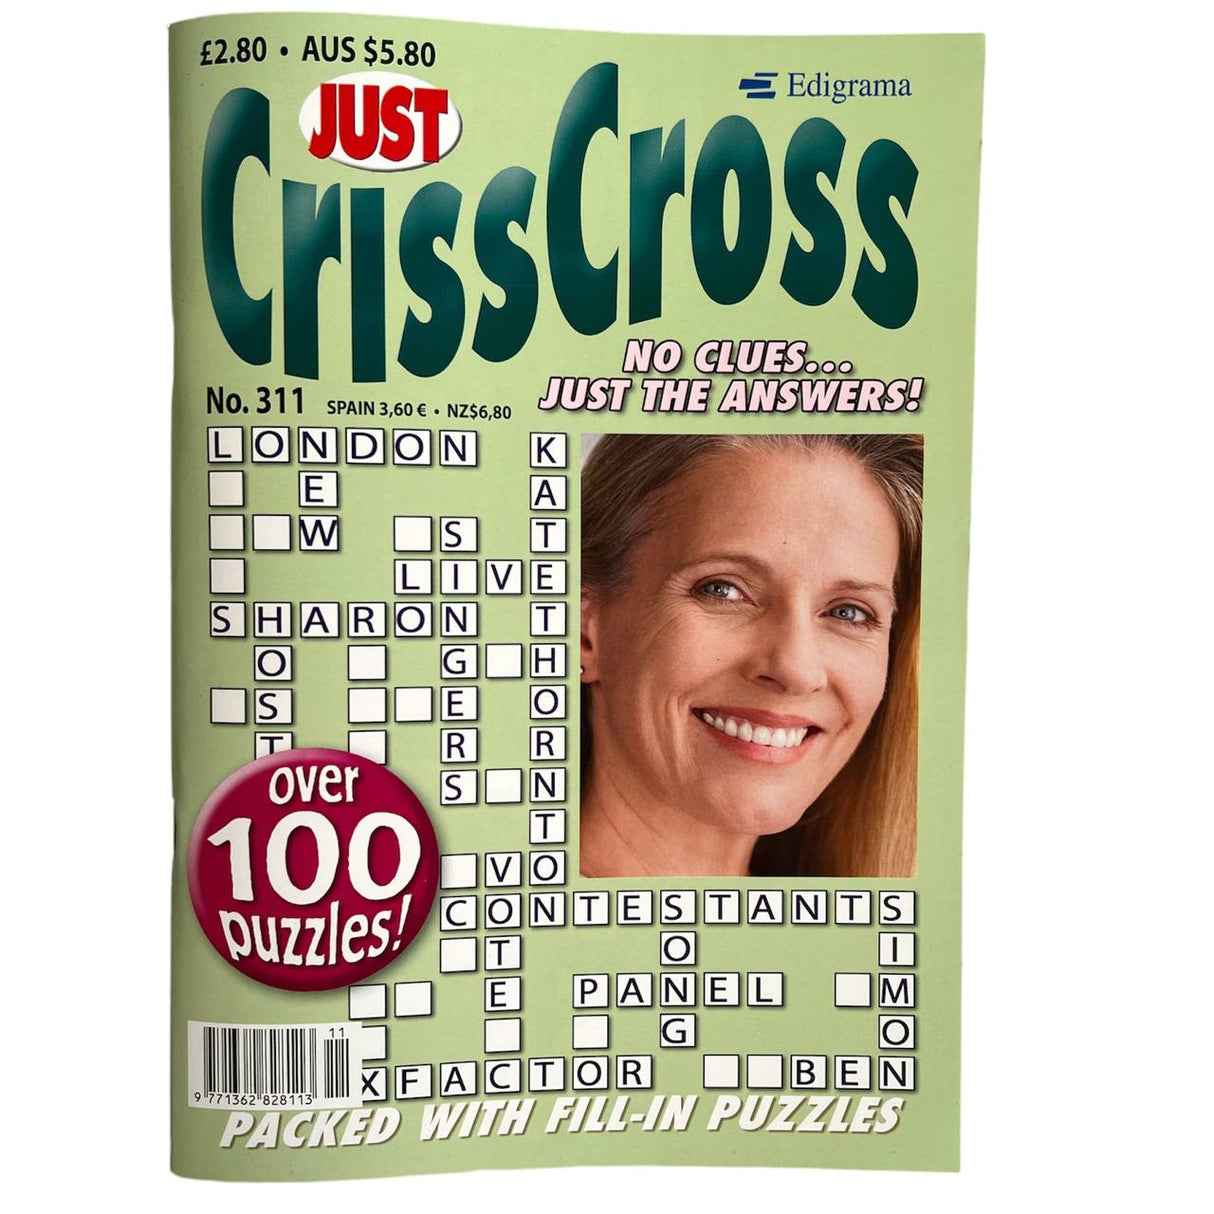 CrissCross Issue No.311 5 for 4